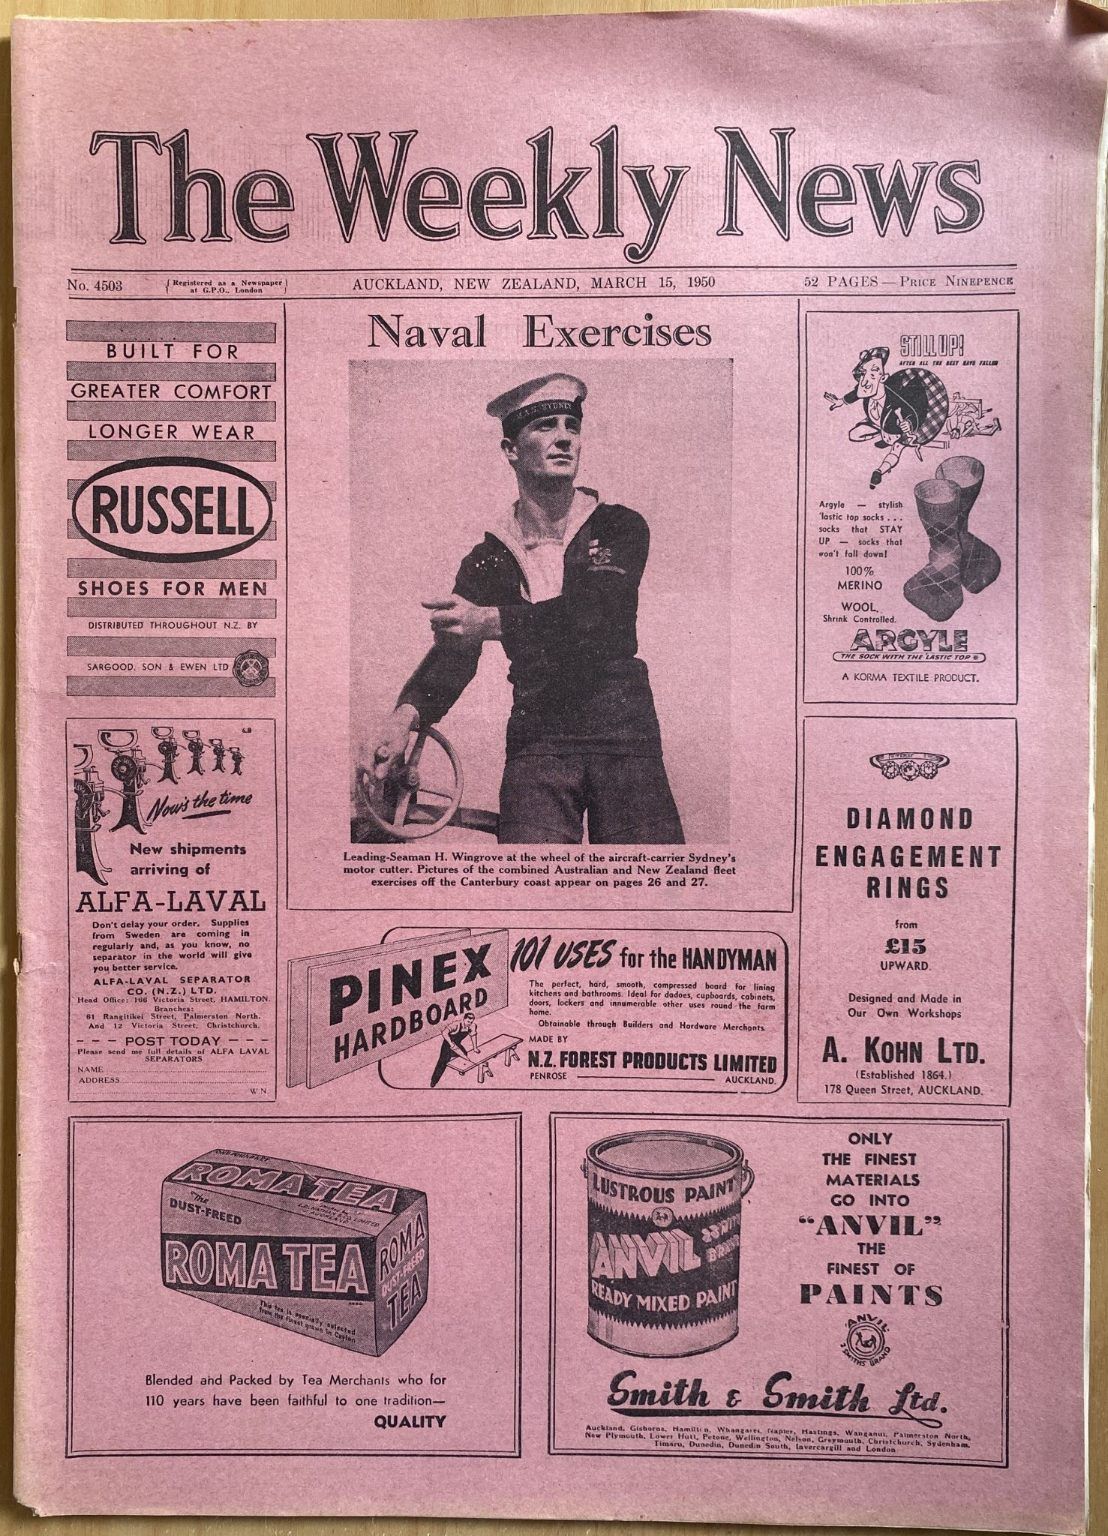 OLD NEWSPAPER: The Weekly News, No. 4503, 15 March 1950